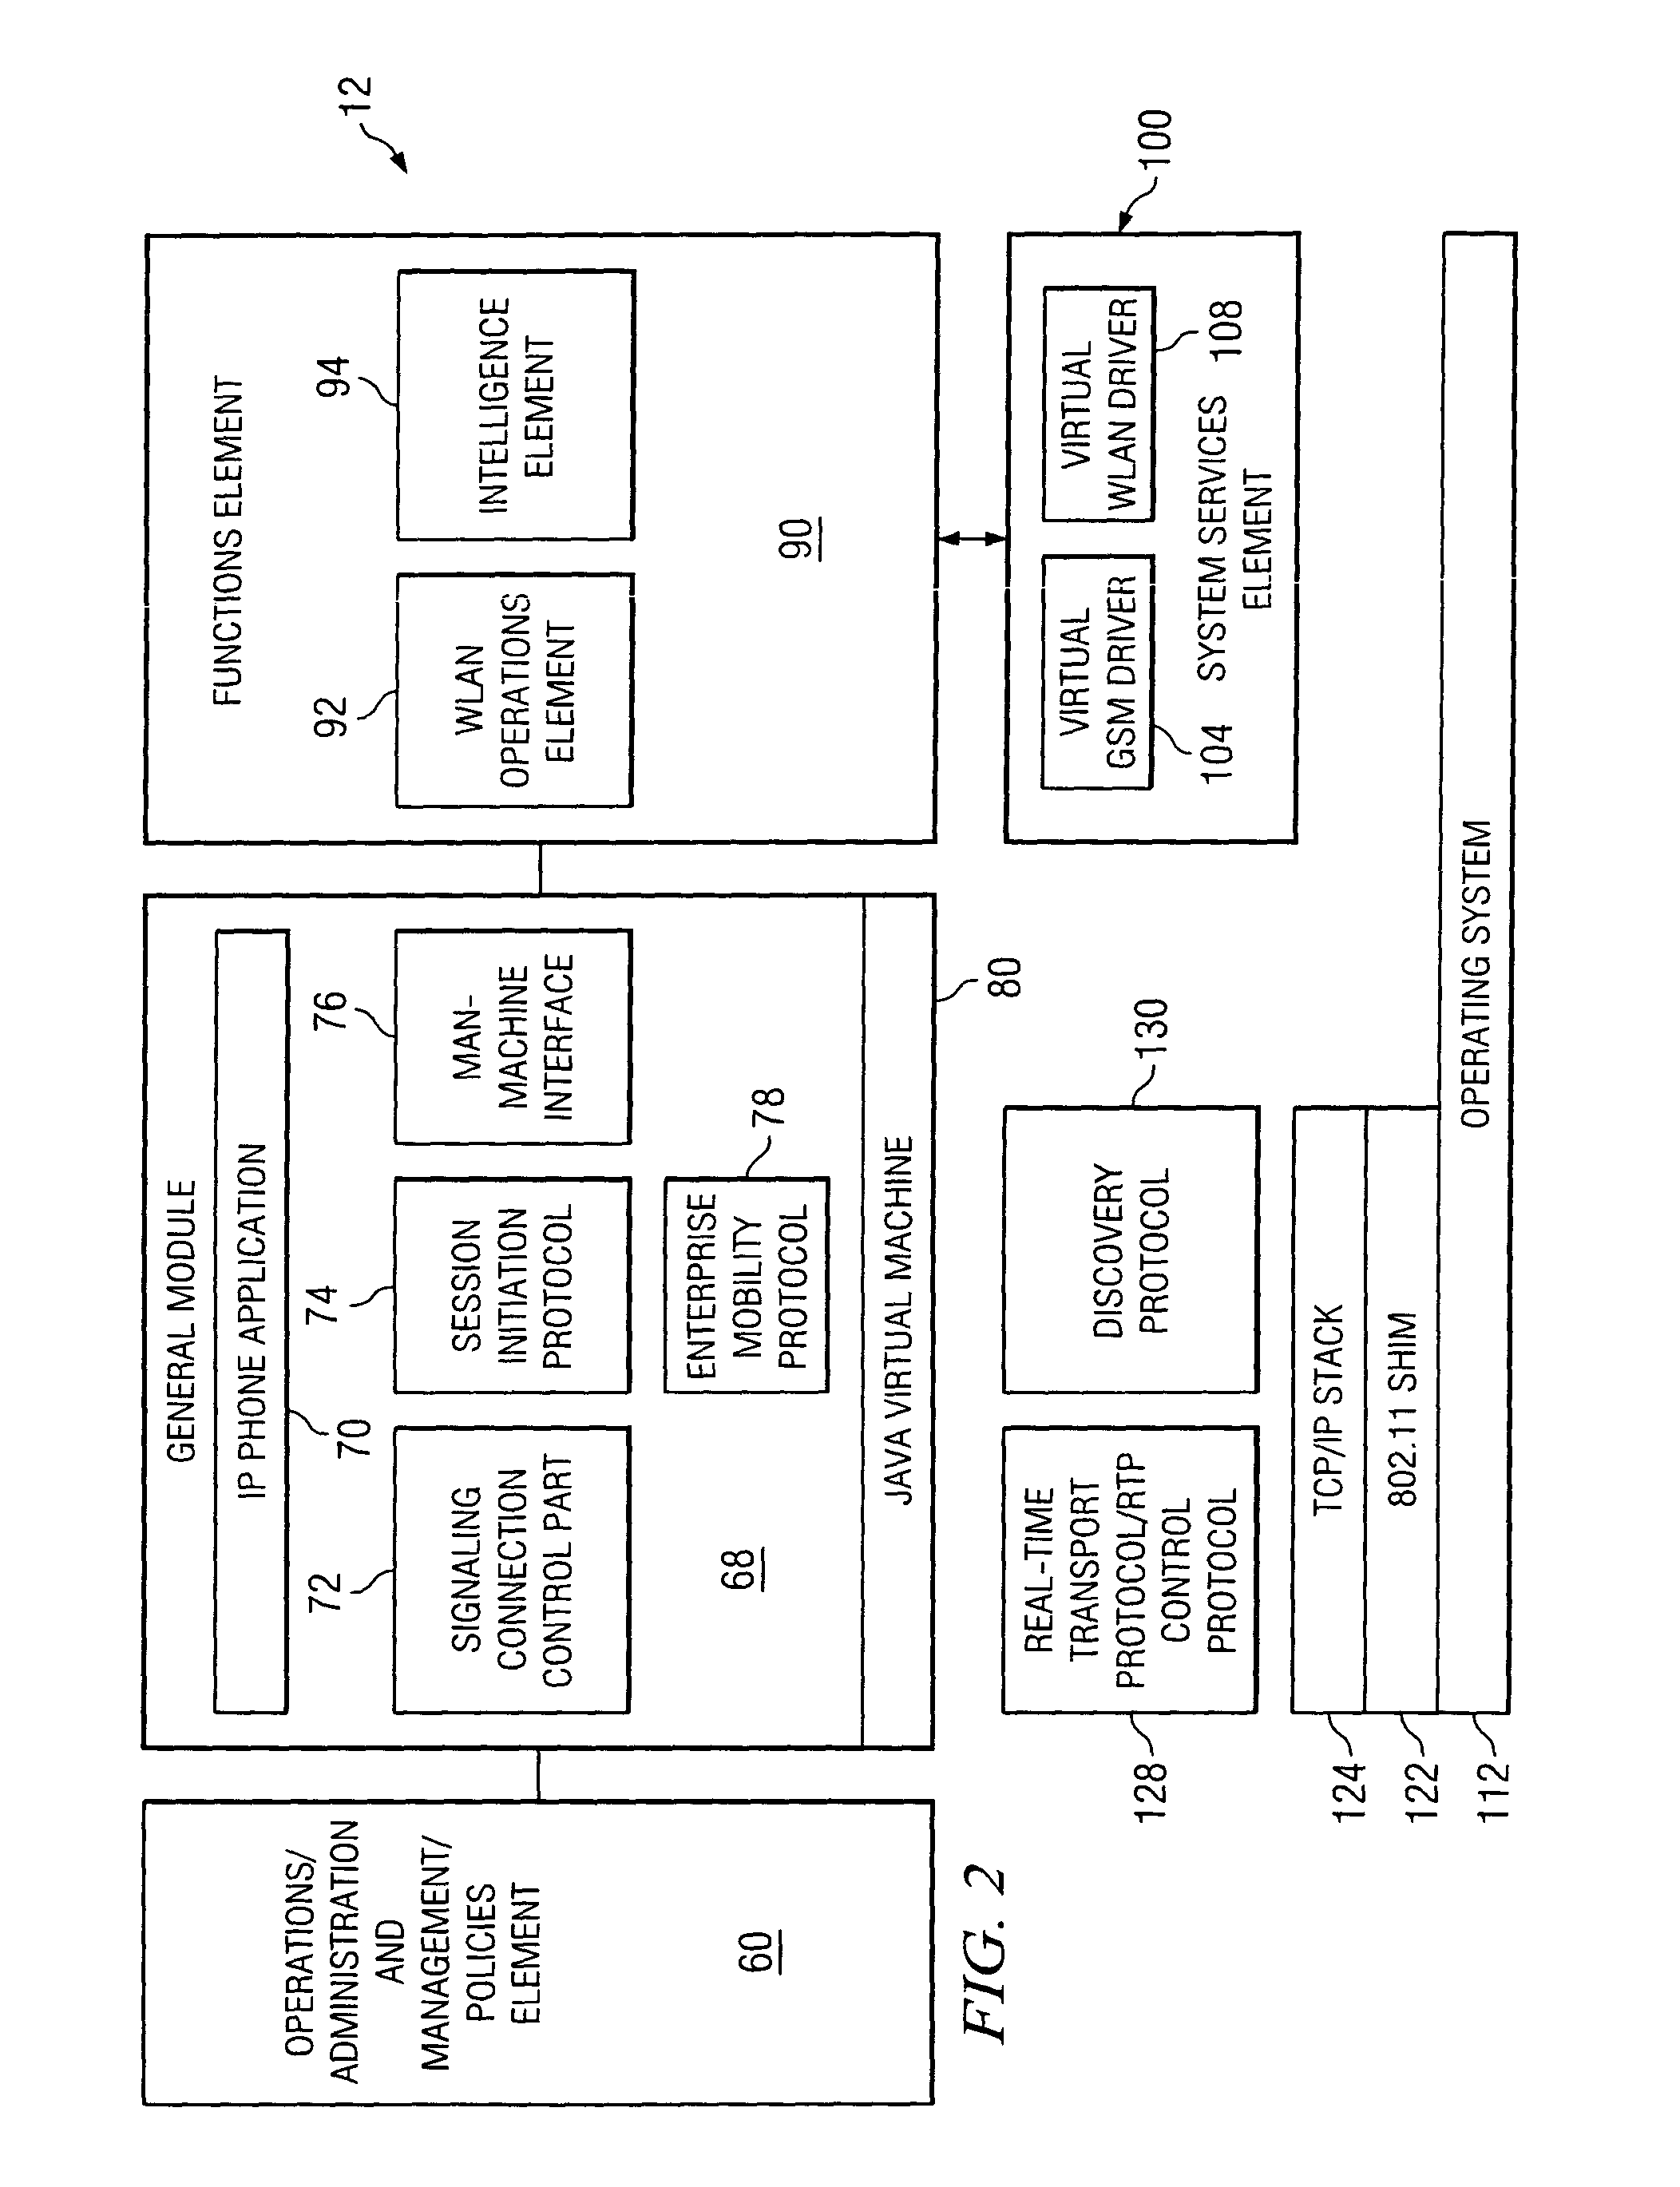 System and method for delivering private network features to a public network